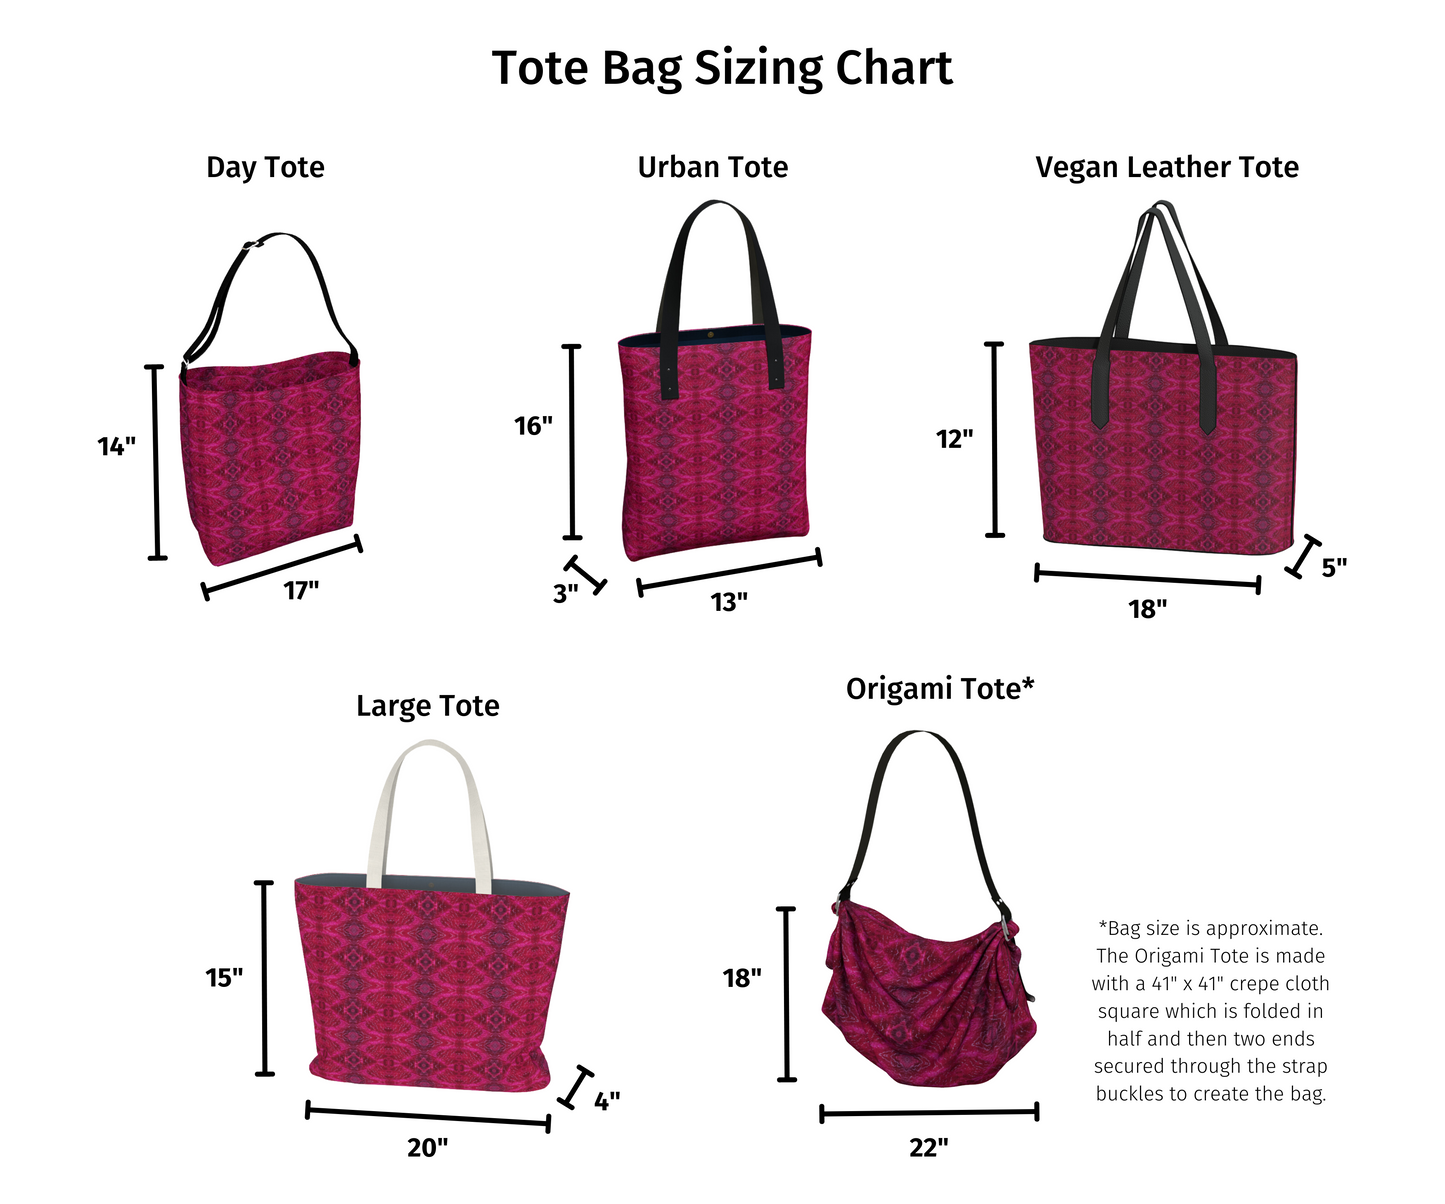 Tote Bag (Large Tote) The 'Beet' Goes On